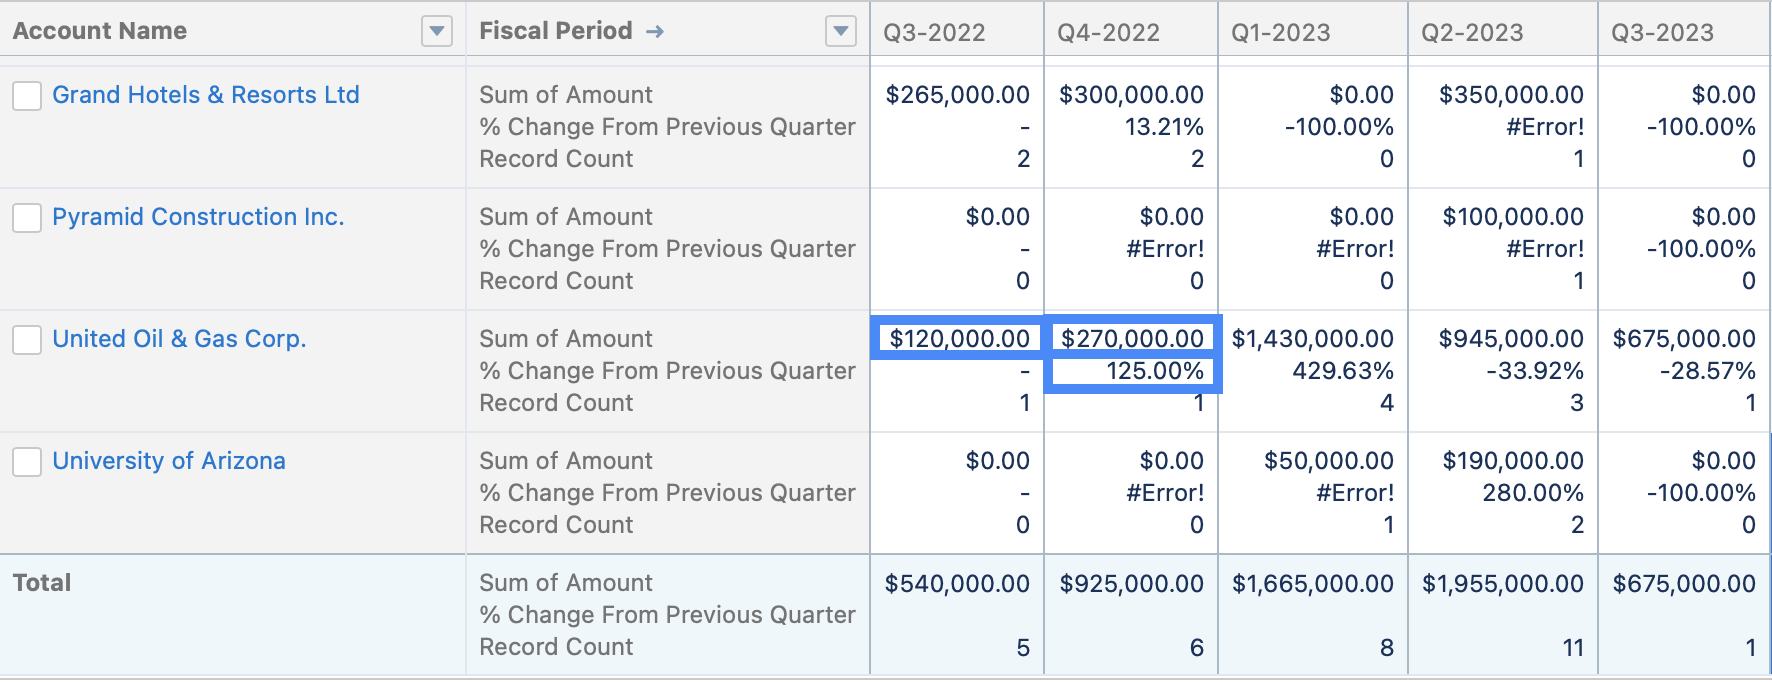 Report sample demonstrating how '% Change From Previous Quarter' now populates in each row and represents the change from quarter to quarter for a given Account.